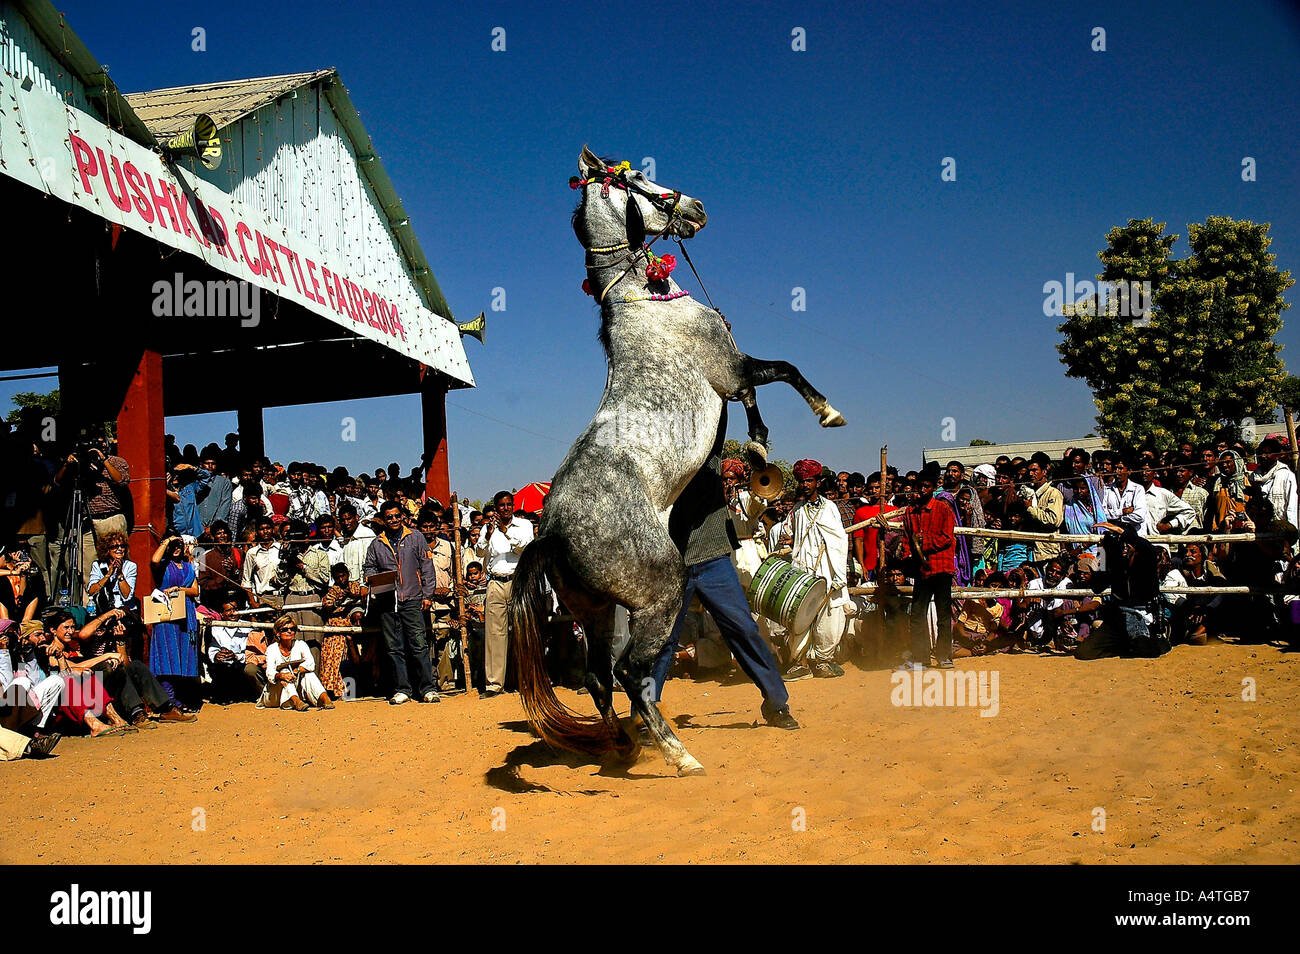 SUB98528 Horse dance performance being enjoyed by foreign tourists Pushkar cattle fair 2004 Rajasthan India Stock Photo